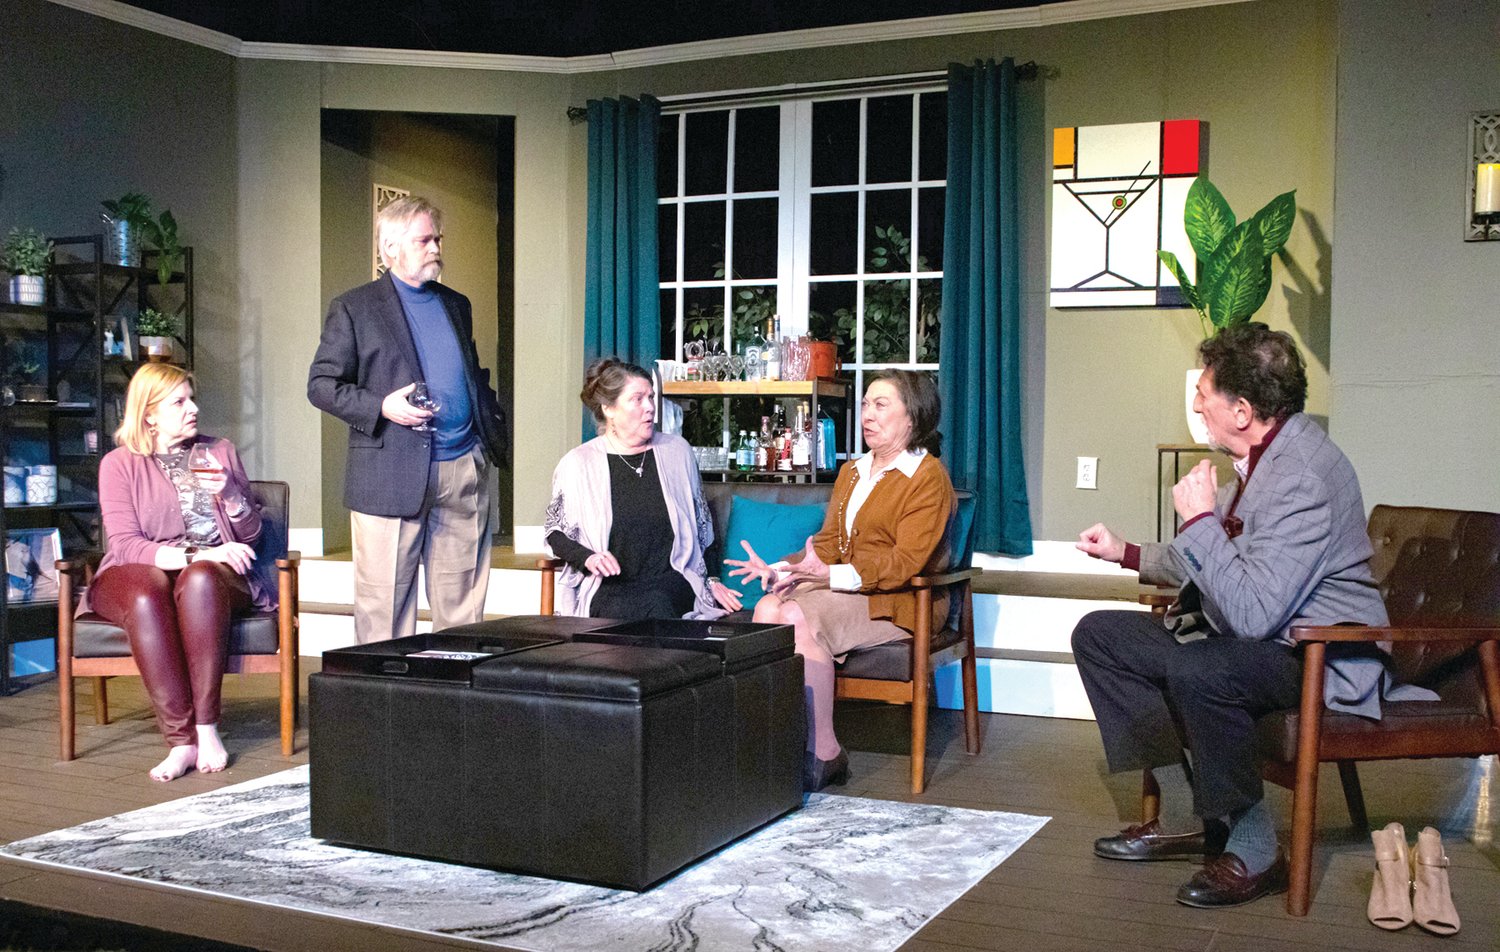 From left are Susan Fowler, George Hartpence, Carol Thompson, Adele Batchelder and Rick Pine, on stage in the ActorsNet production of “A Delicate Balance.”